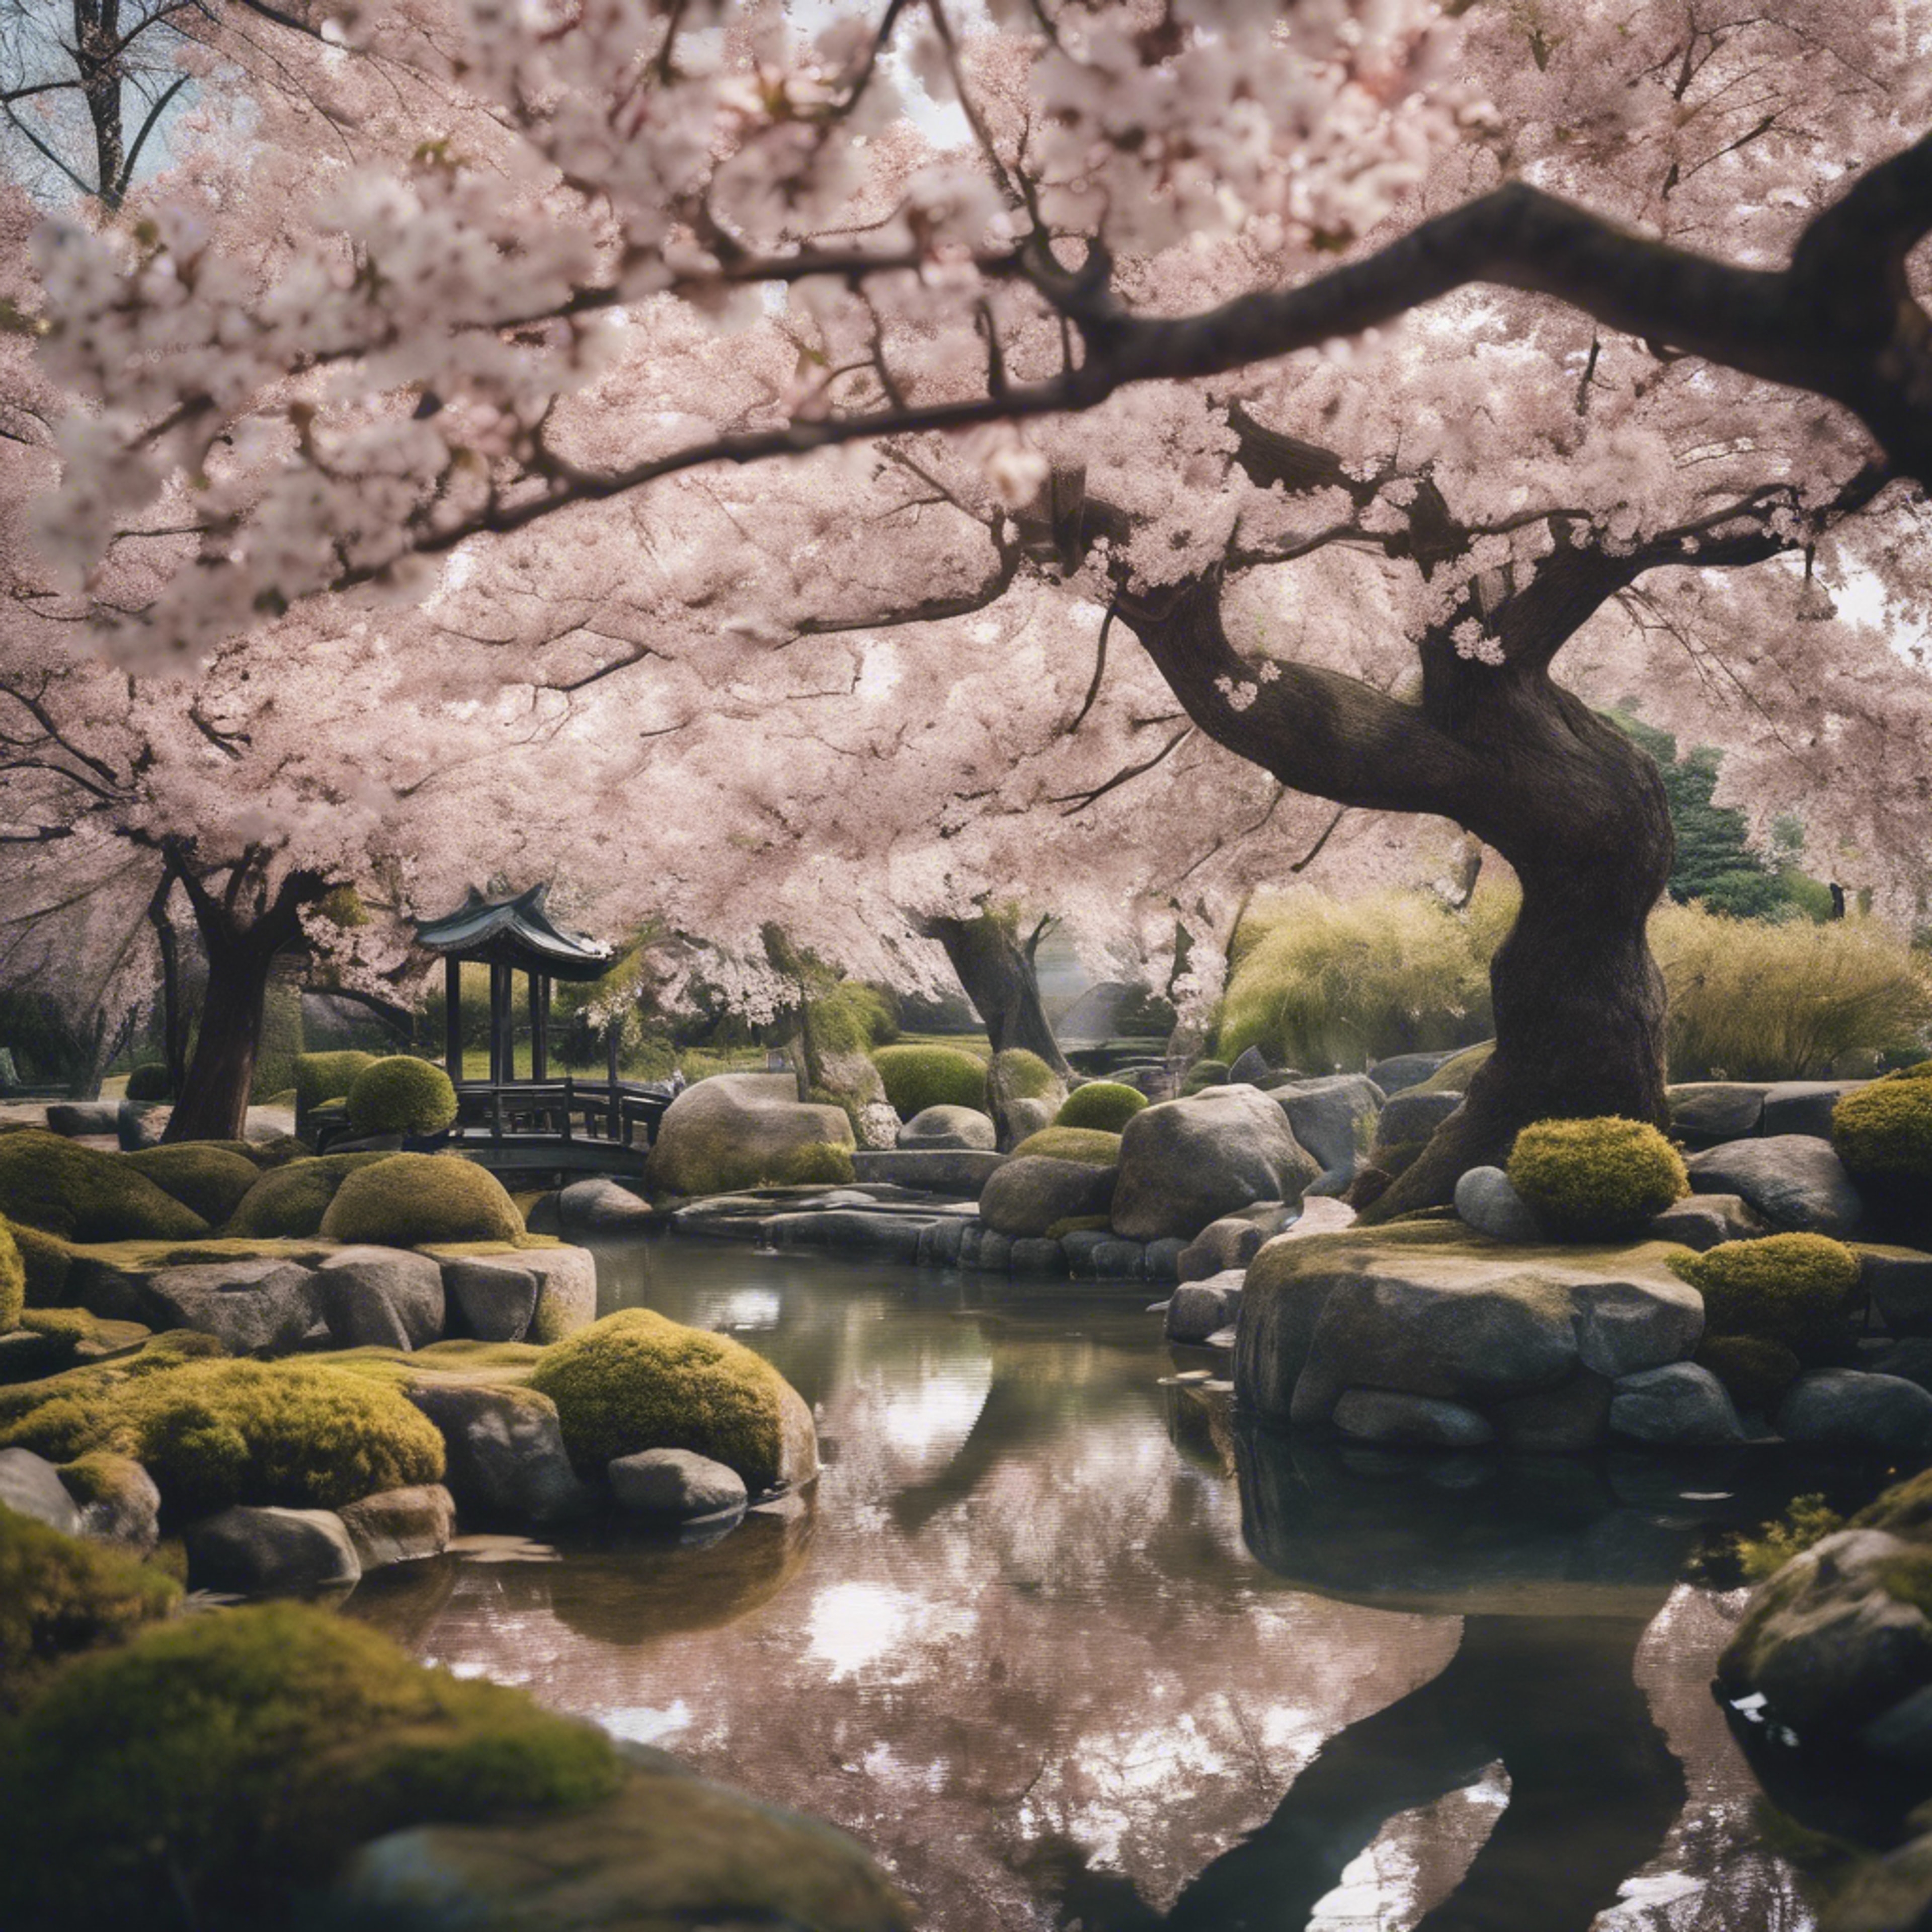 A wide-angle view of a serene Japanese garden with cherry blossoms in full bloom. ផ្ទាំង​រូបភាព[cf6d4e9694a4479cb5ff]